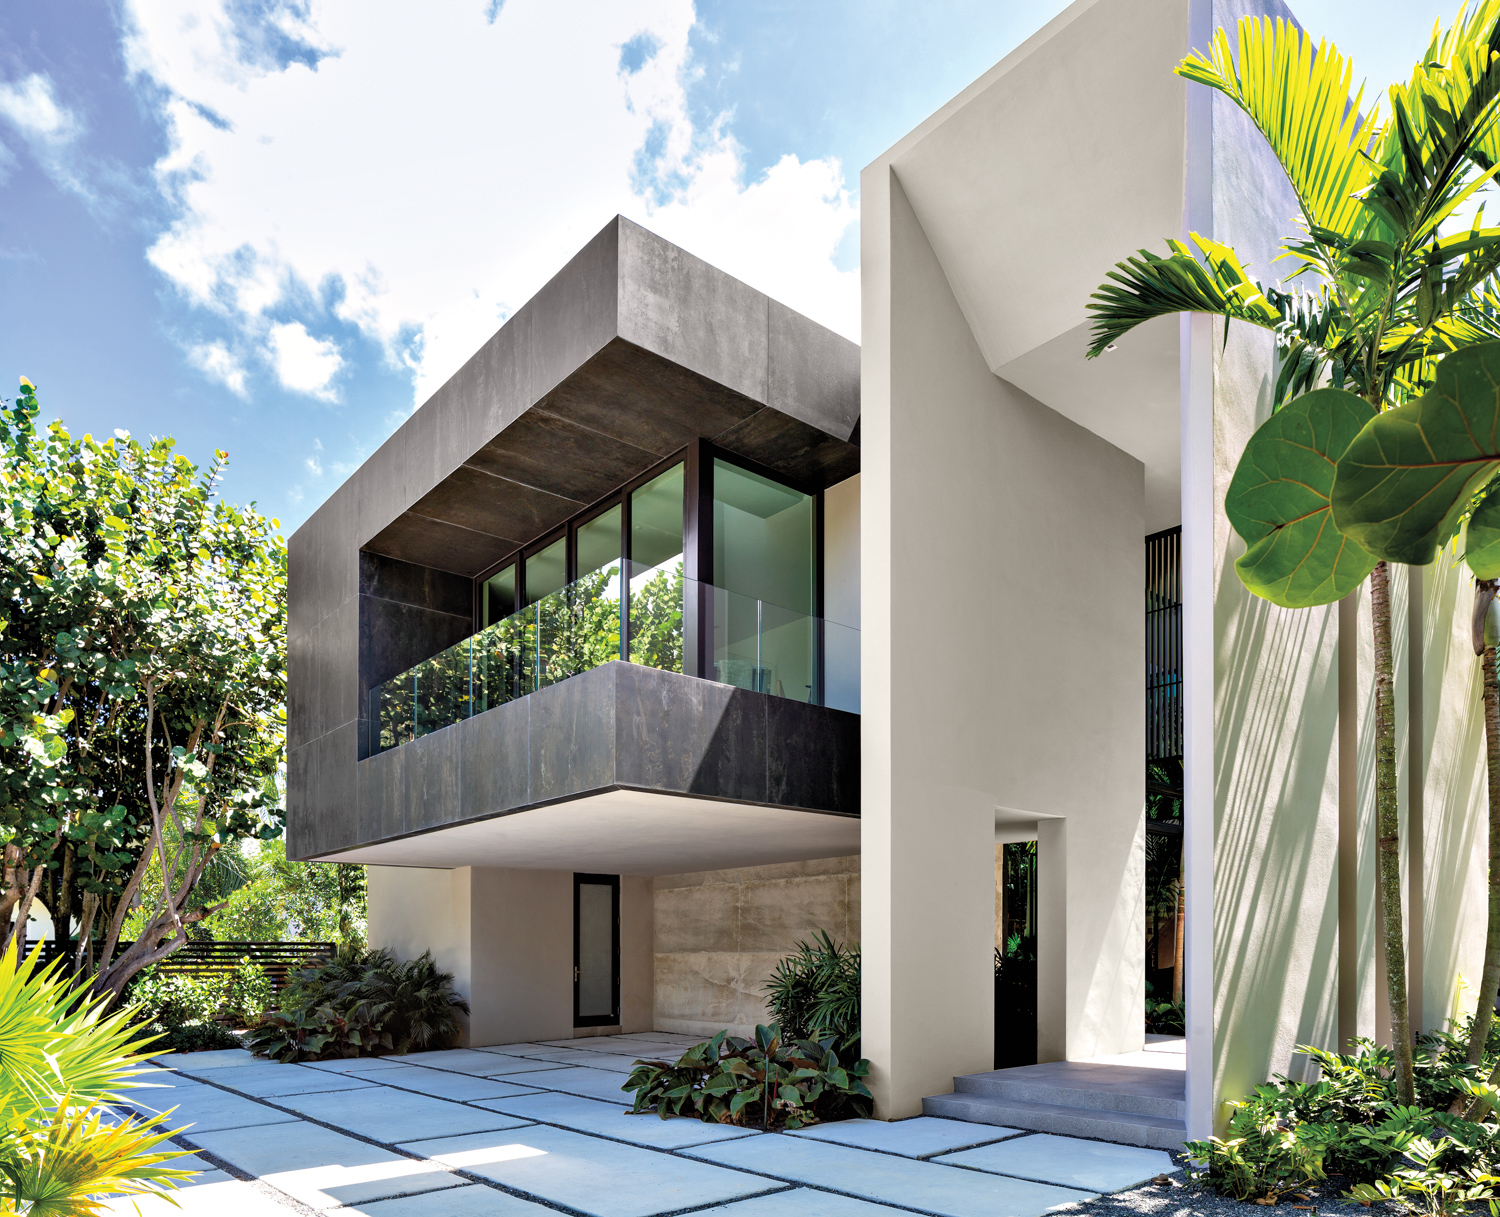 exterior of contemporary Miami home with cantilevered forms of stucco, glass and ipe wood